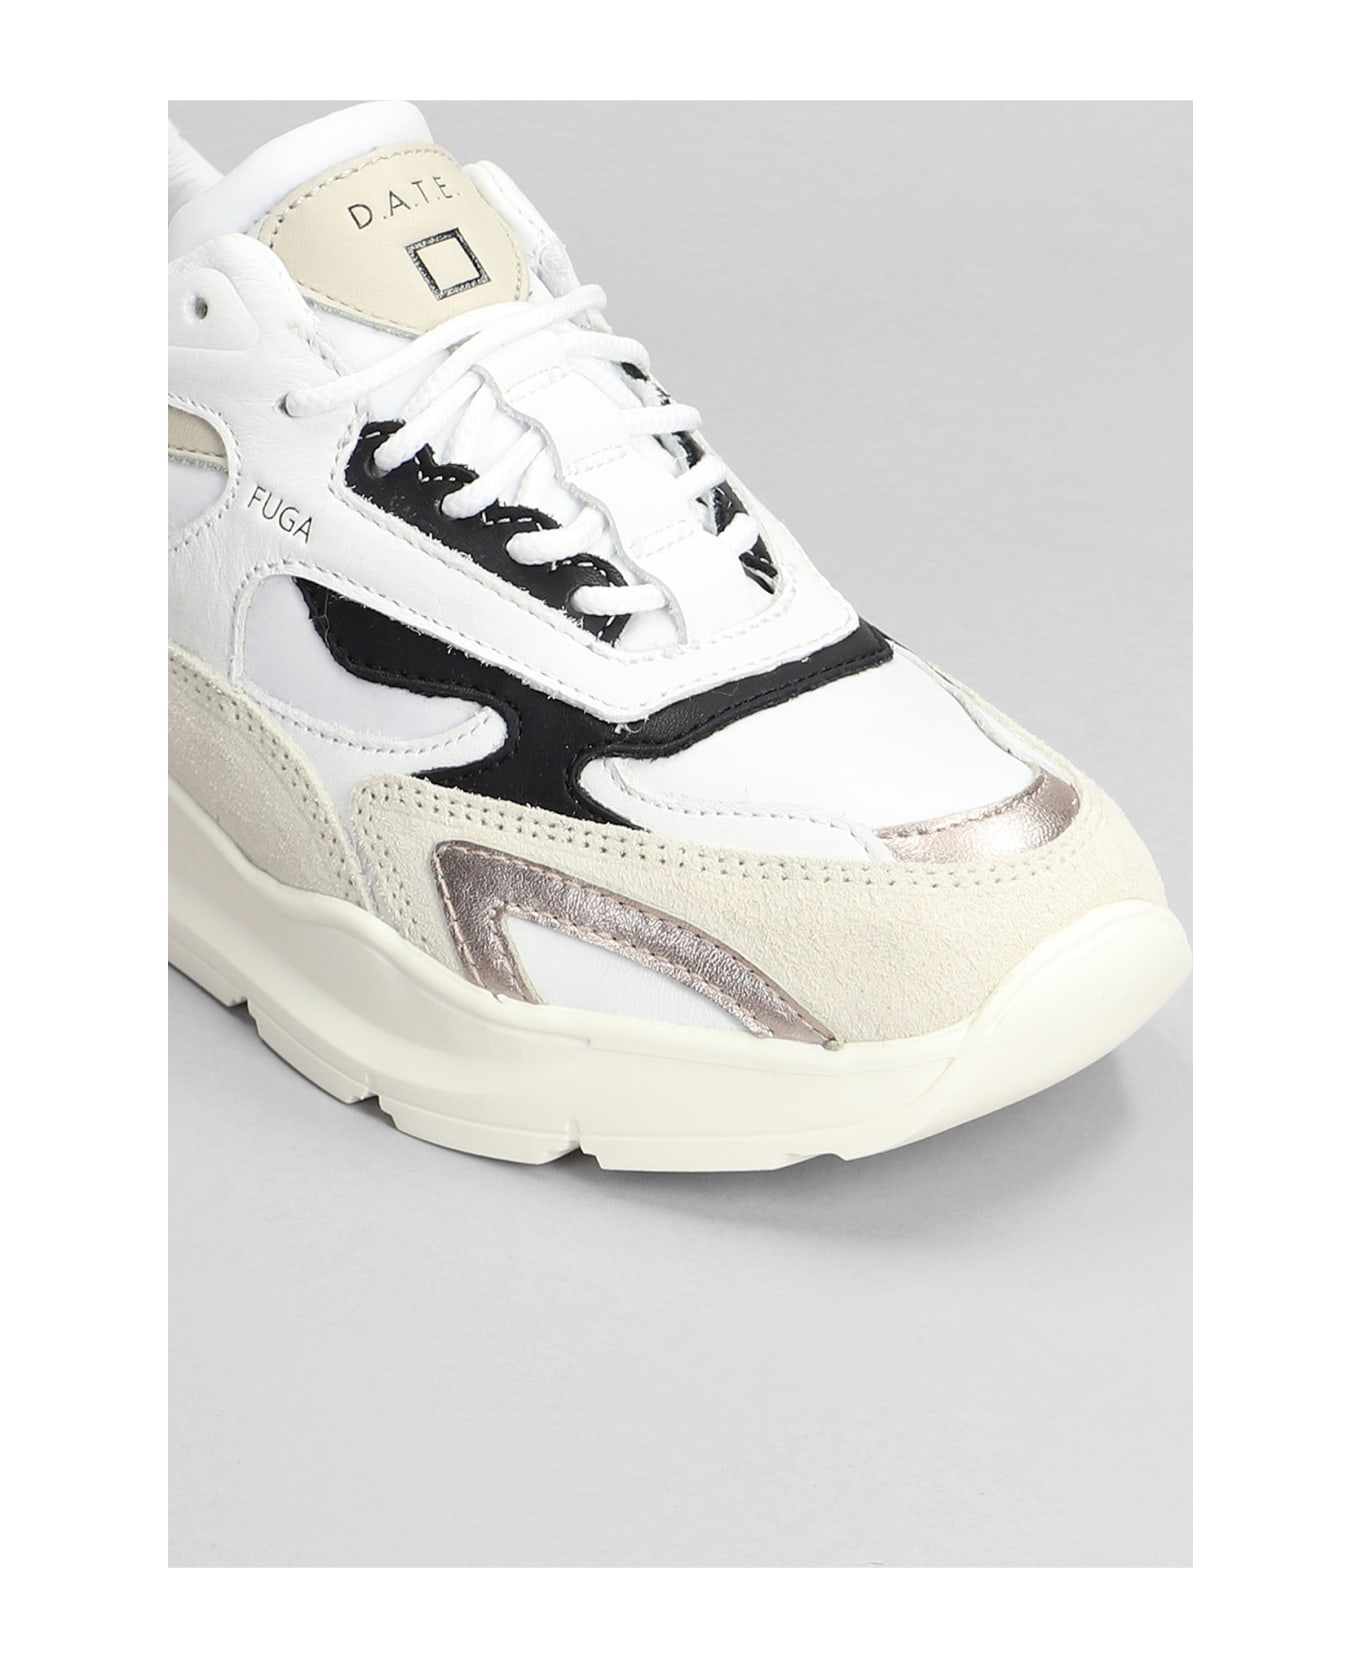 D.A.T.E. Fuga Sneakers In White Suede And Leather - white